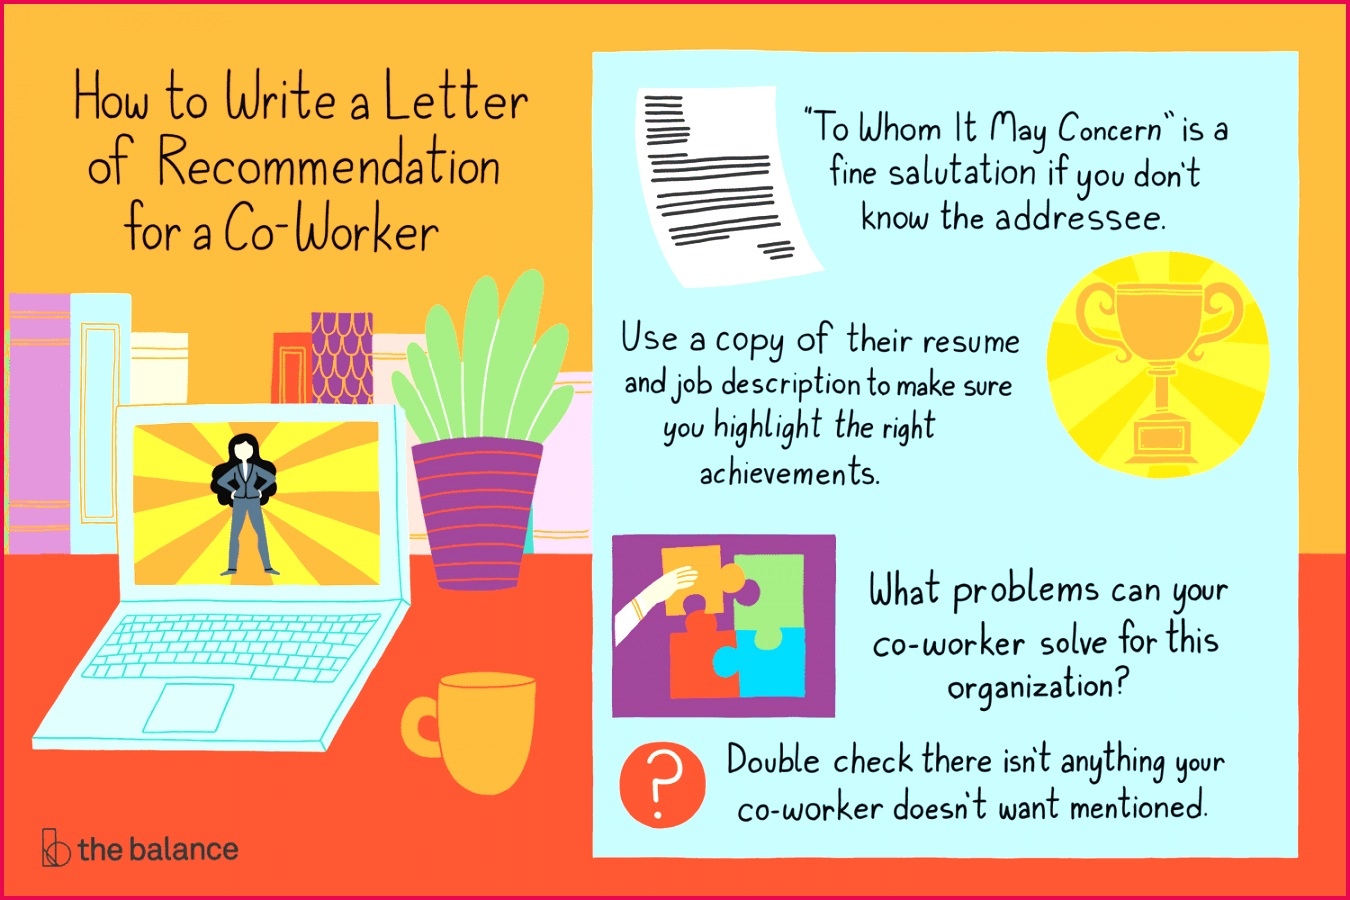 how to write a letter of re mendation for a co worker v1 5bc4bdbbc9e77c ff2f7